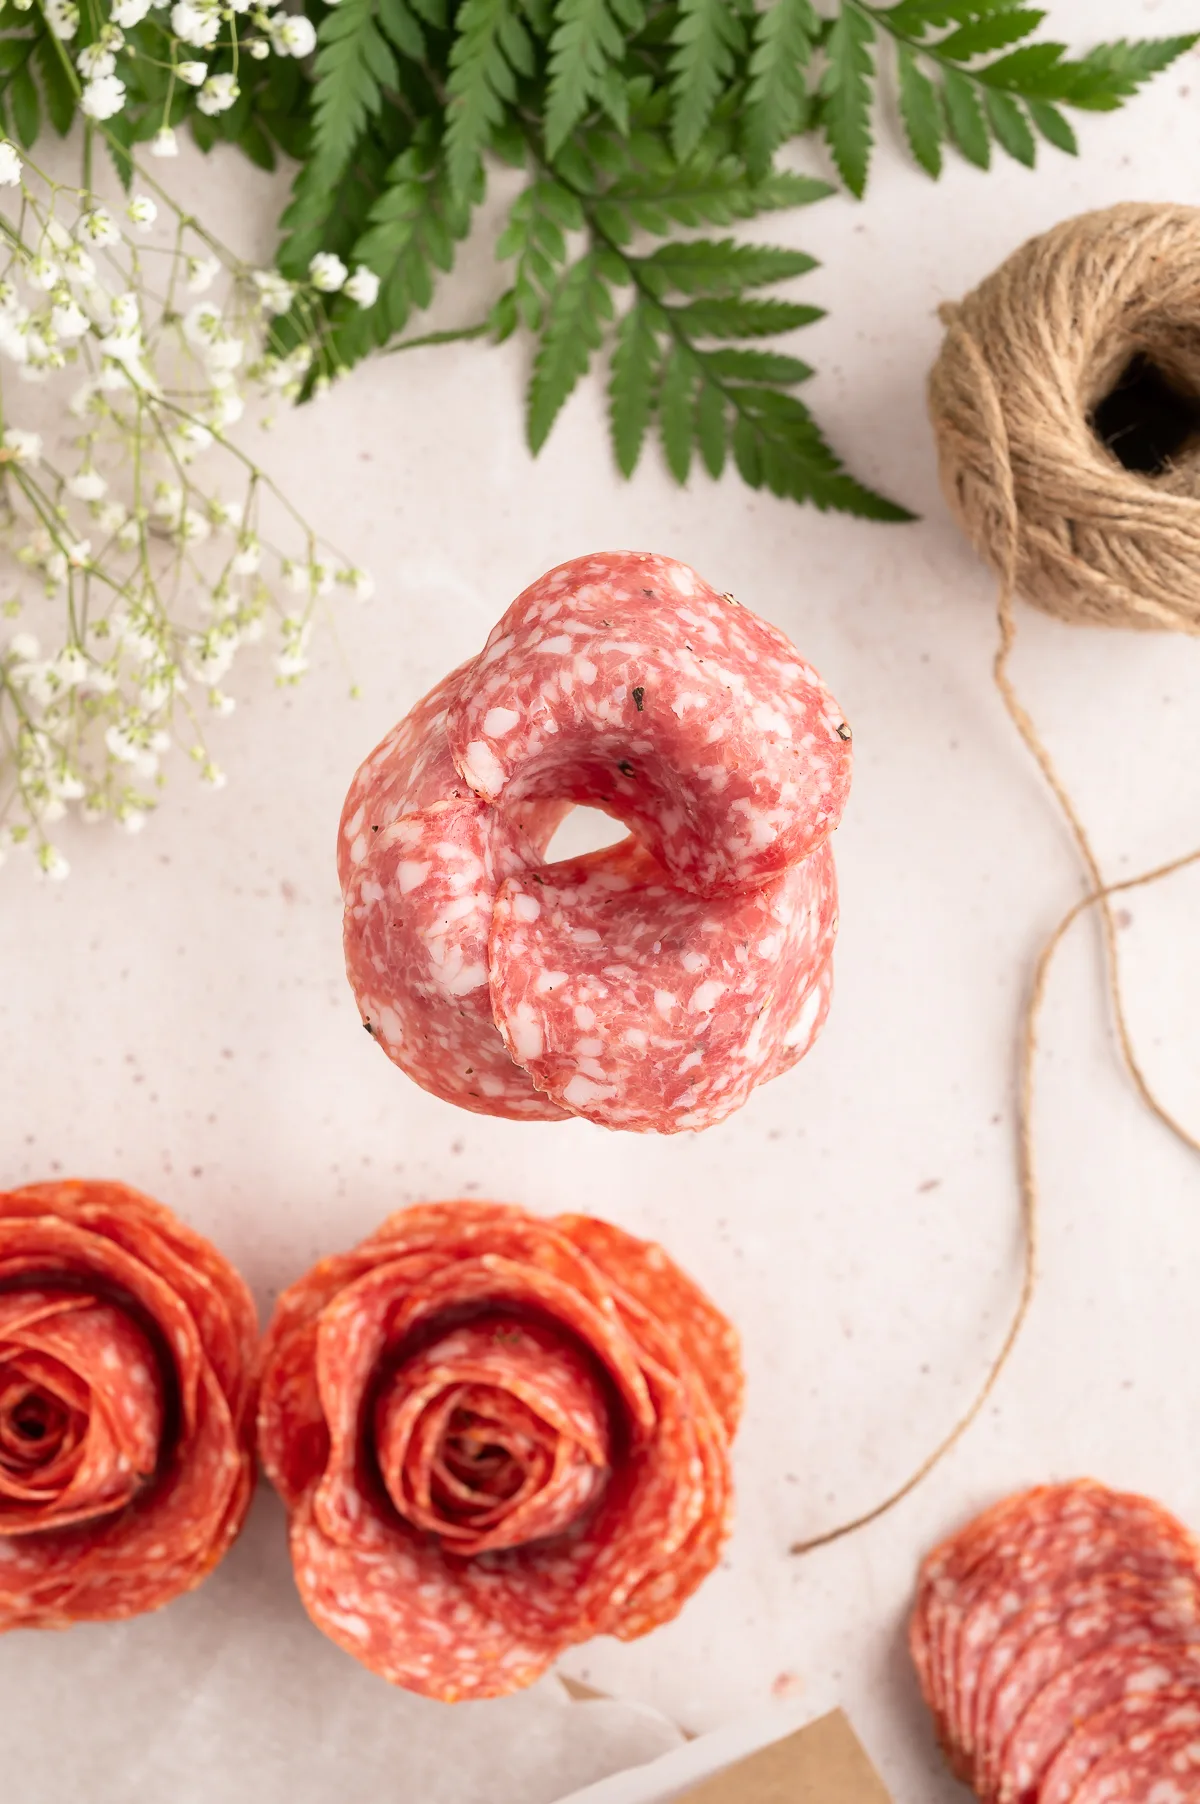 adding layers of salami to make roses with a champagne glass